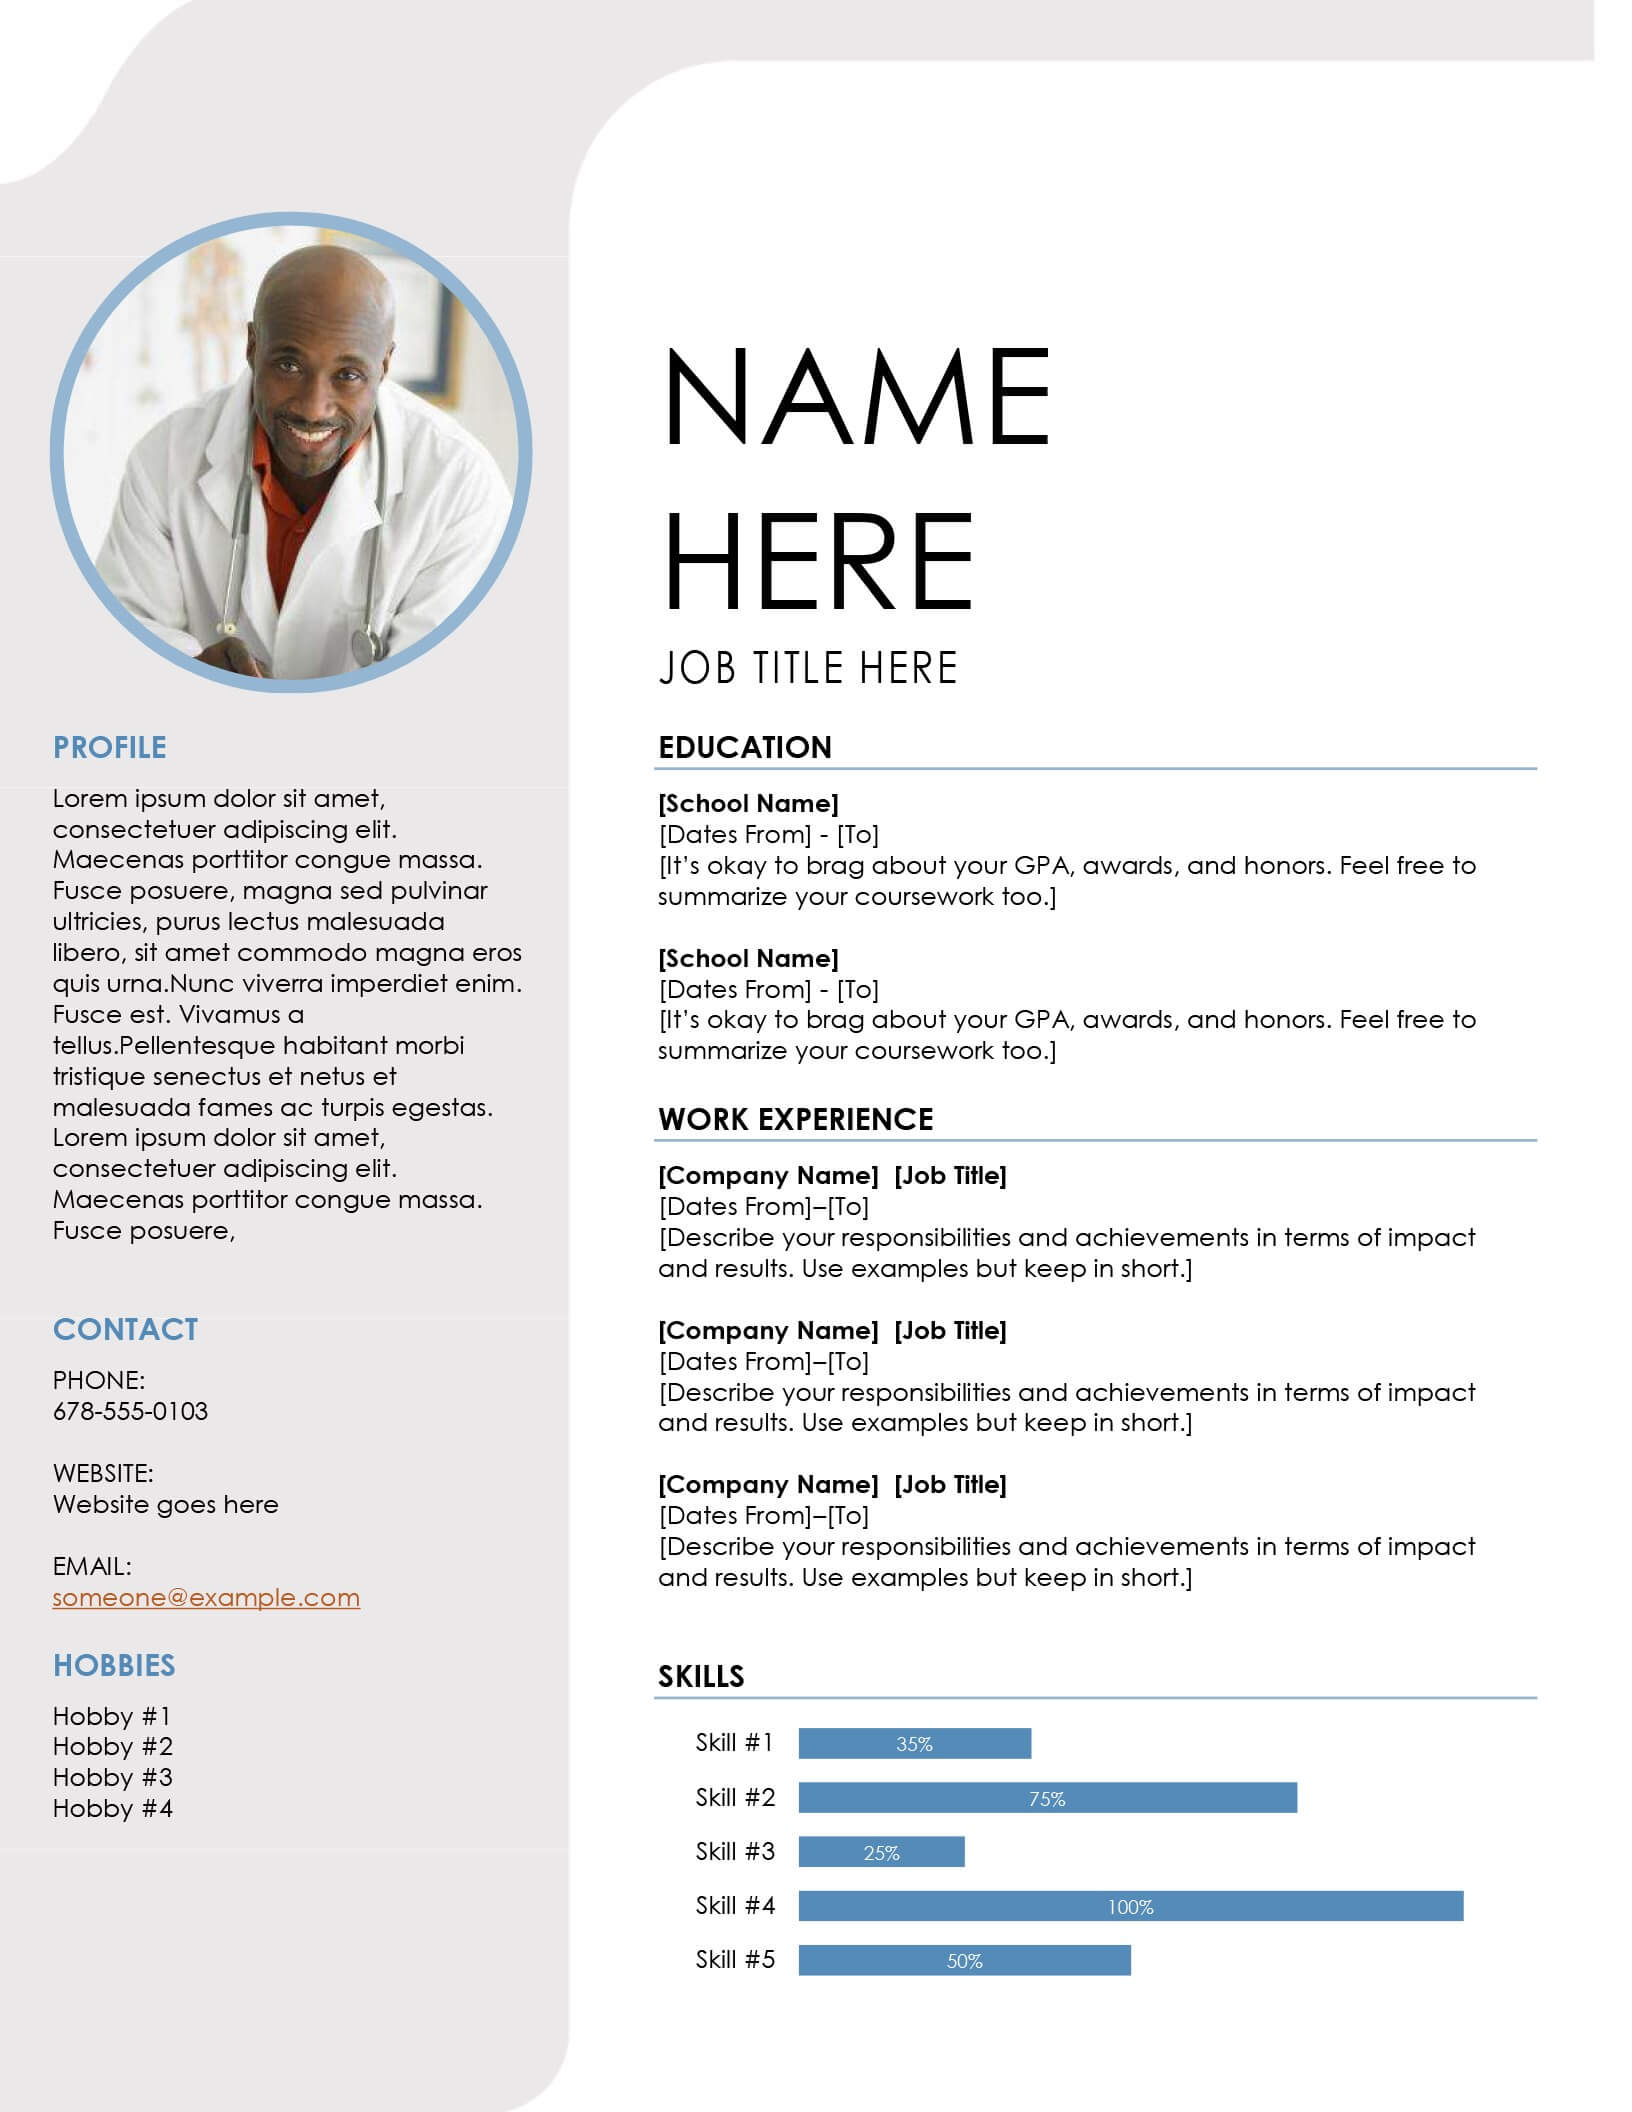 Resumes And Cover Letters - Office Throughout Free Downloadable Resume Templates For Word